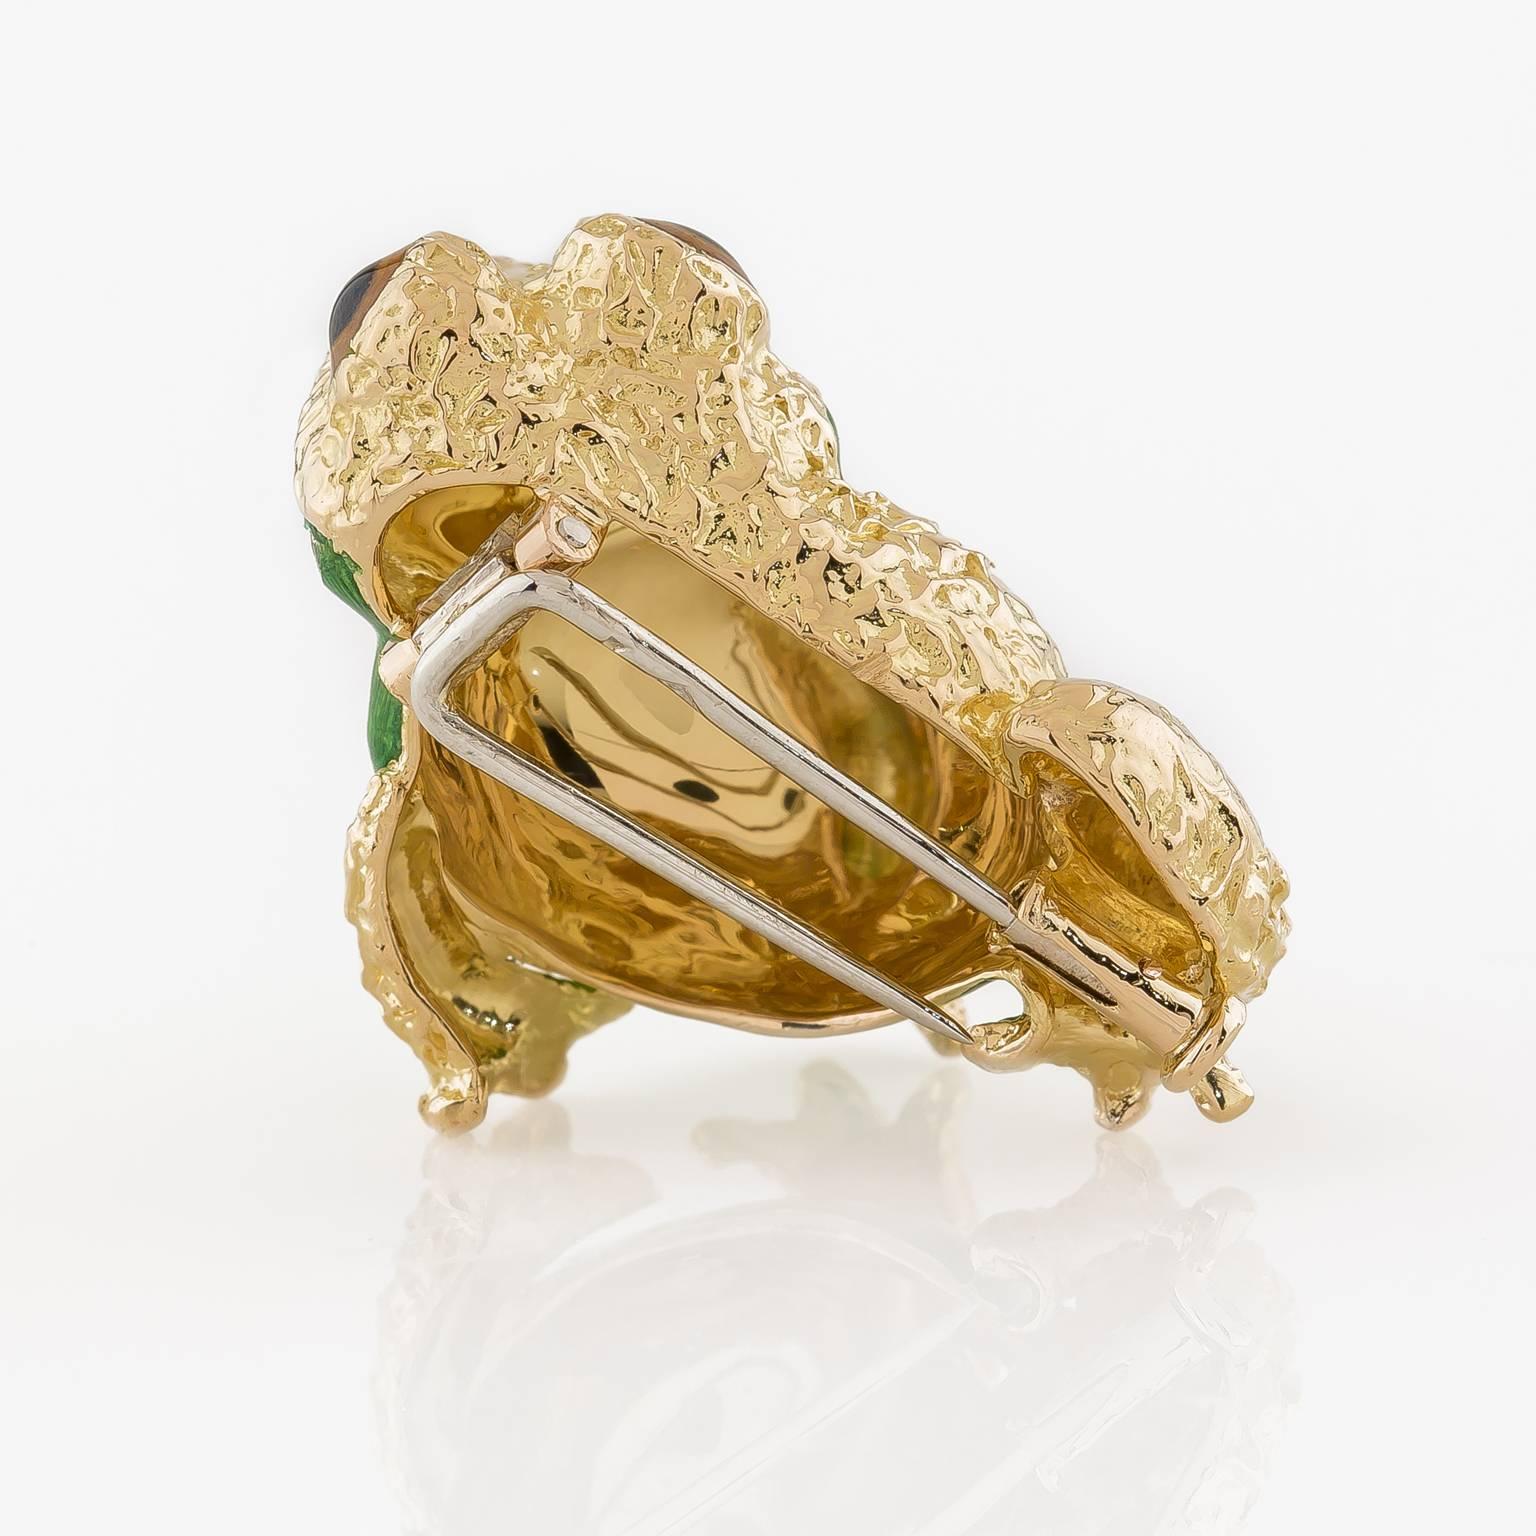 Adorable 18k yellow gold frog in a textured finish detailed with an enameled body and eyes.

1in ( 2.54cm) x .94 in (2.38cm)